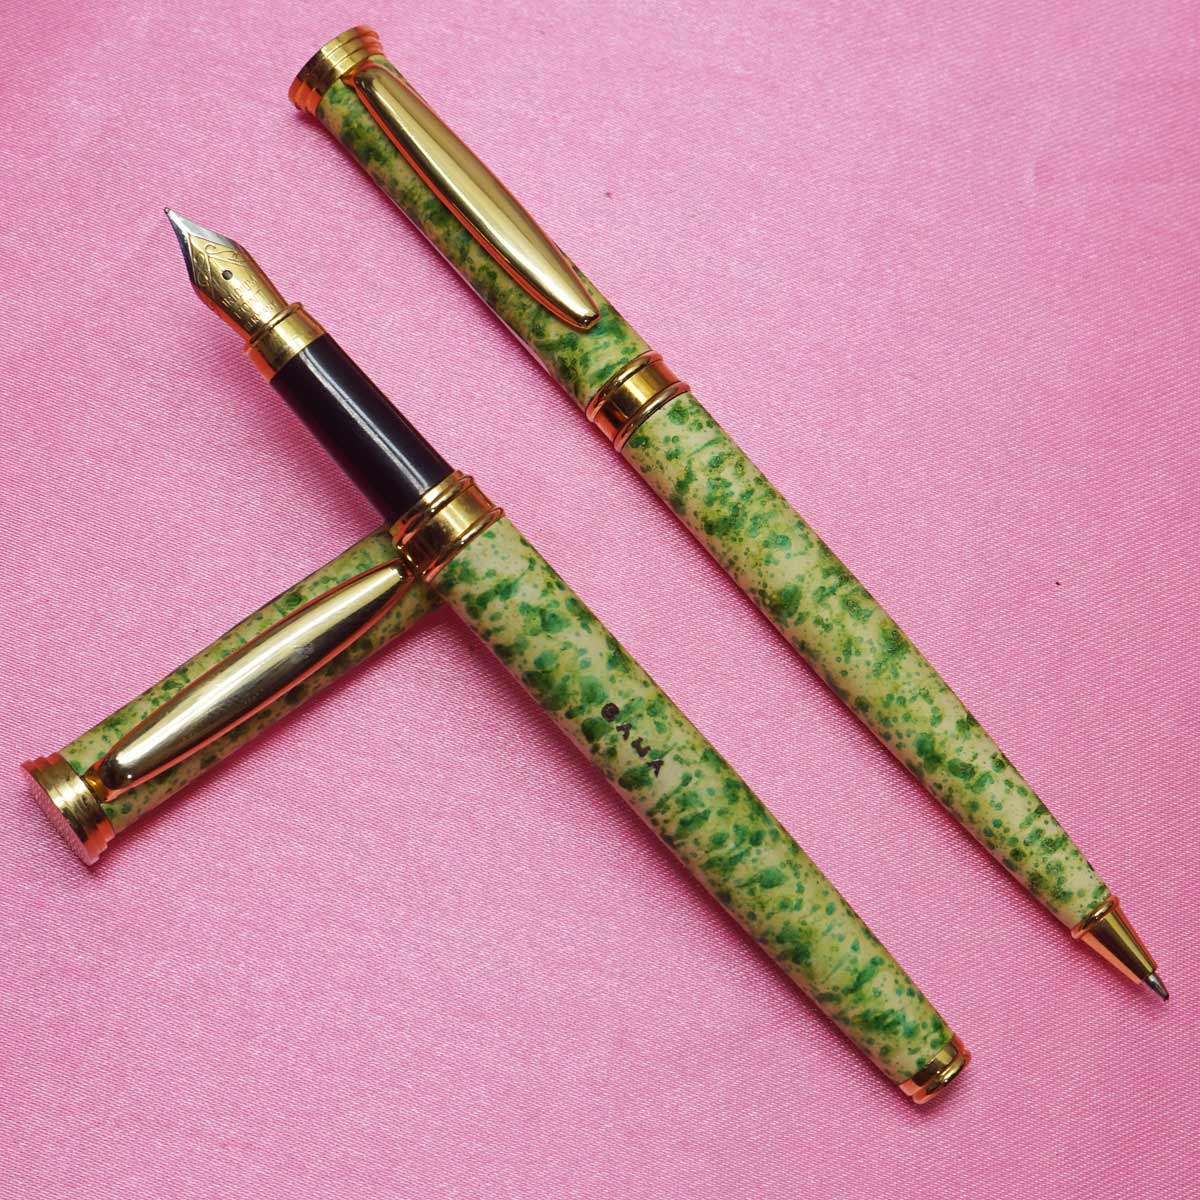 Gama Green Marble Design Cap and Body with Gold Trims No.5 Dual Tone Fine Tipped Convertor Type Fountain Pen SKU 22227